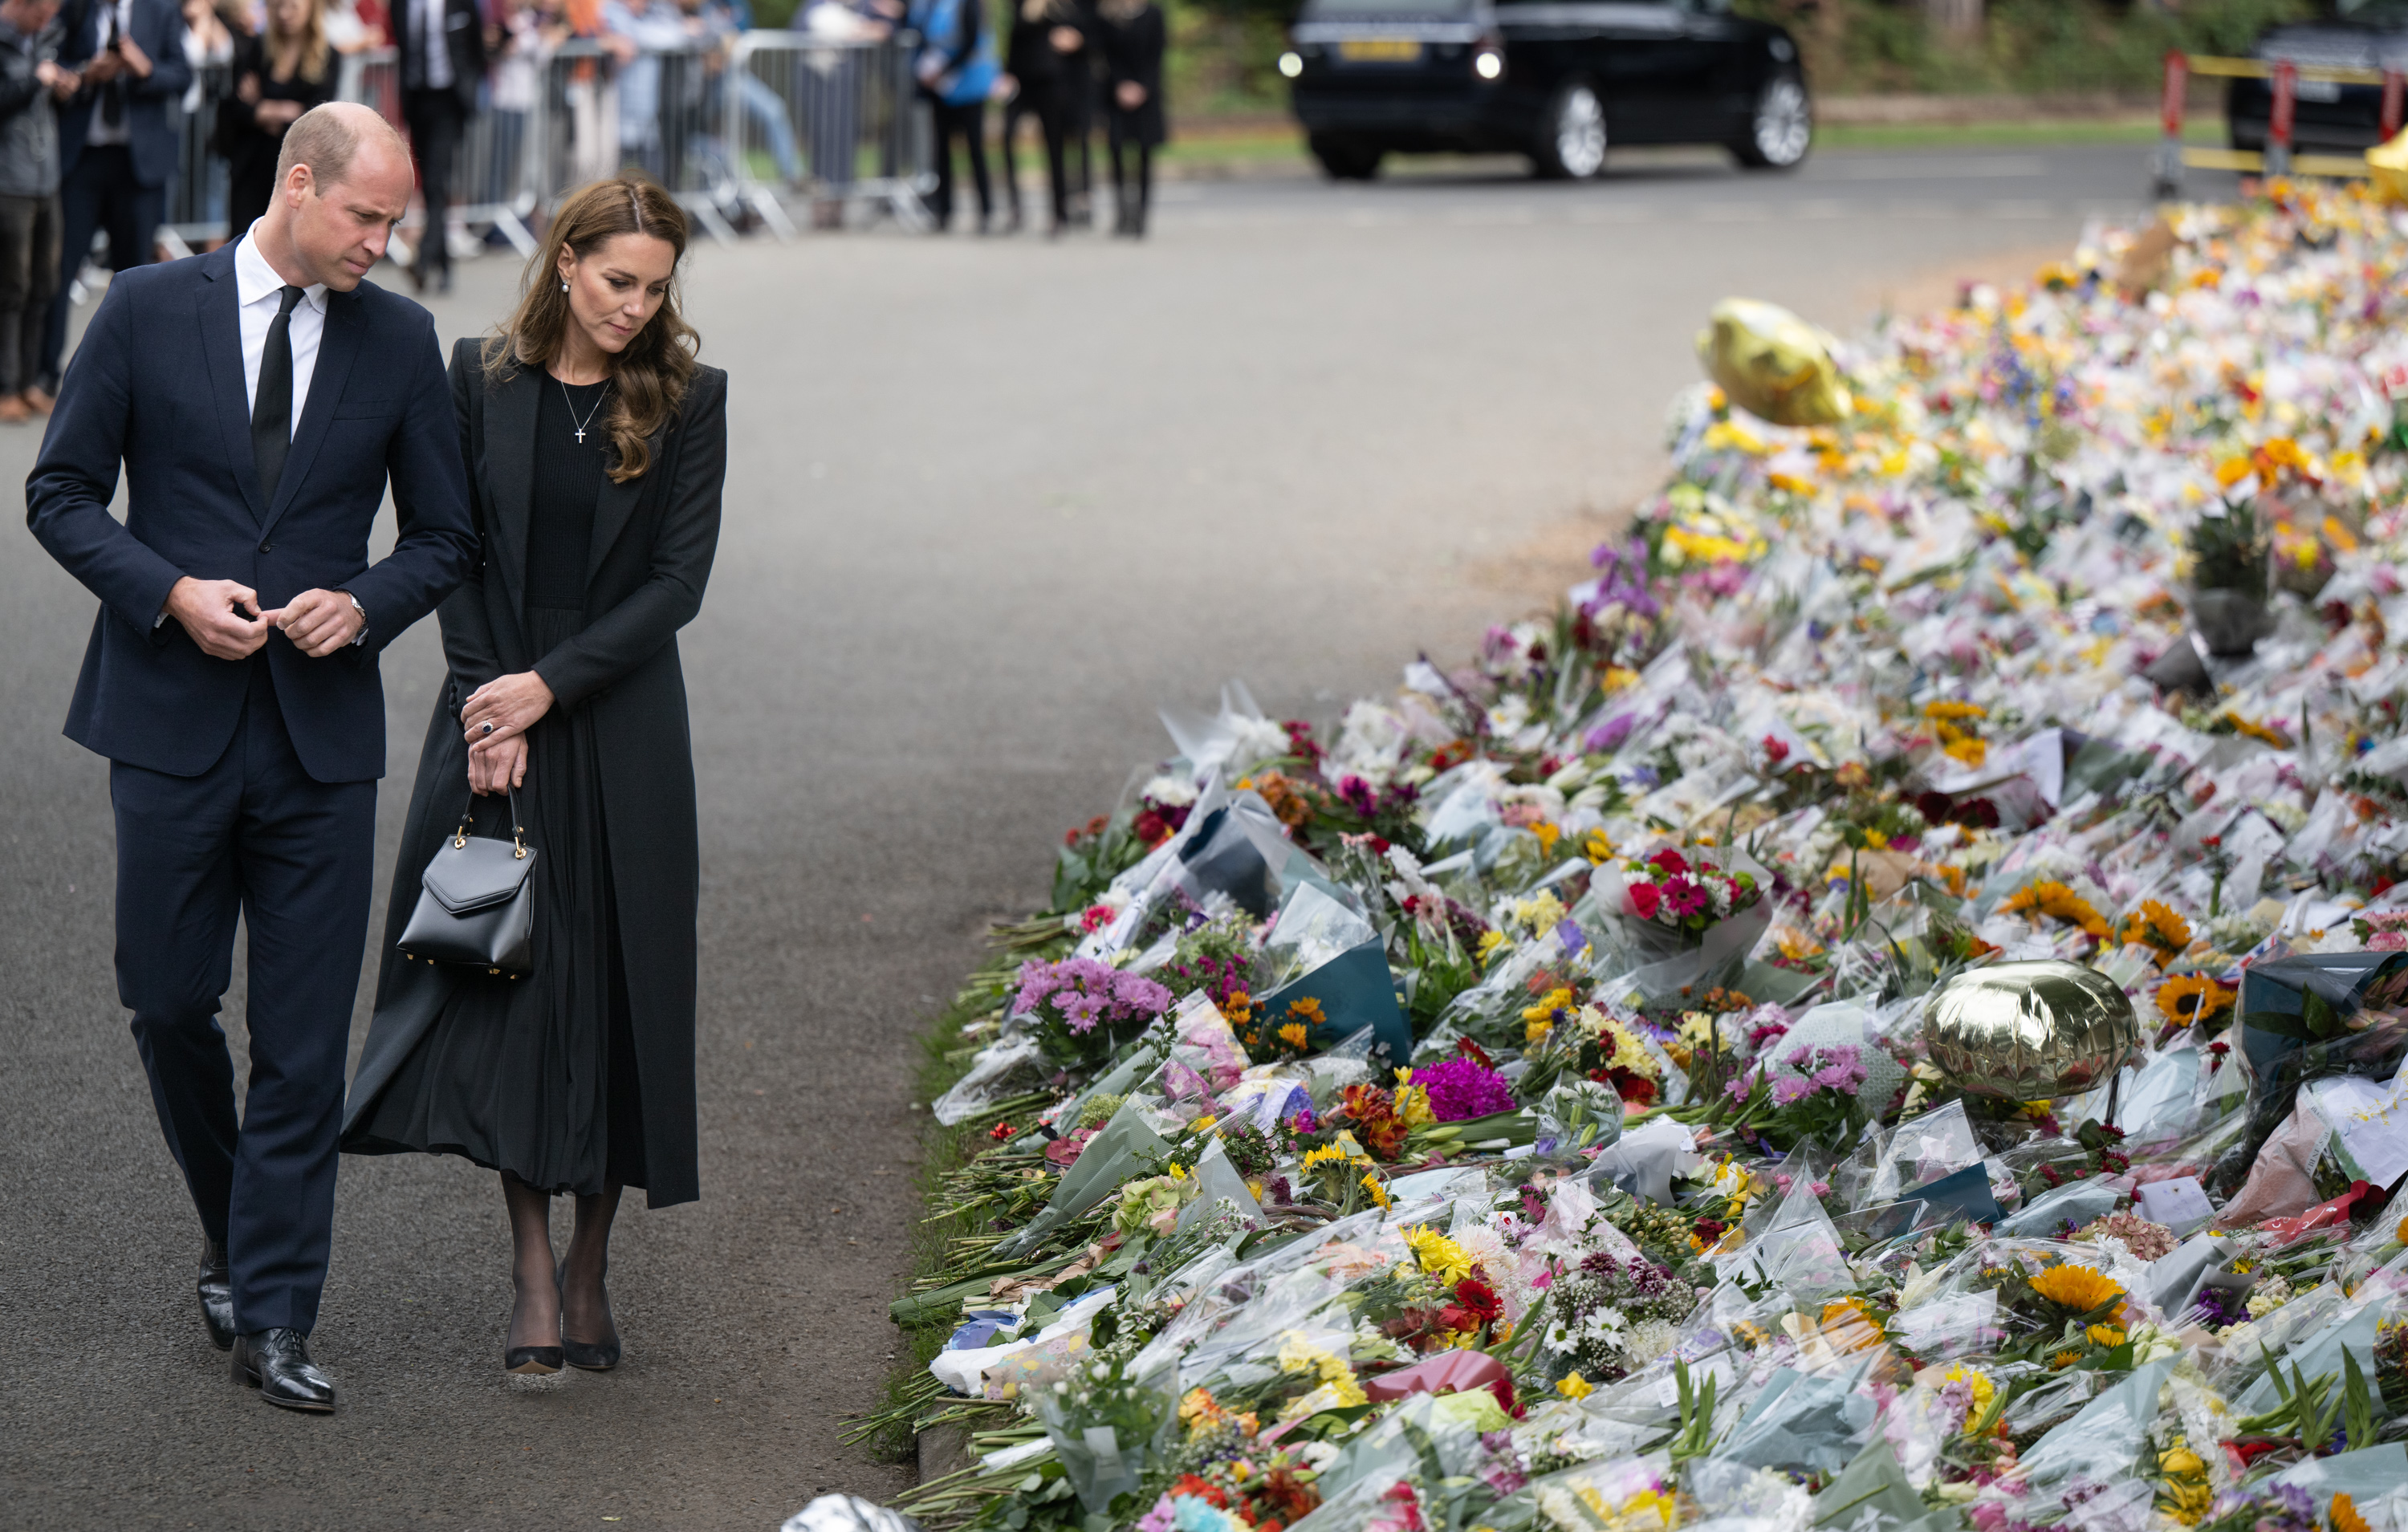 <p><a href="https://www.wonderwall.com/celebrity/profiles/overview/prince-william-482.article">Prince William</a> and Princess Kate viewed floral tributes left at the Norwich Gates outside Queen Elizabeth II's Sandringham estate in King's Lynn, England -- where the royal family traditionally spent their Christmases when the monarch was alive -- on Sept. 15, 2022, in the lead-up to Her Majesty's funeral.</p>